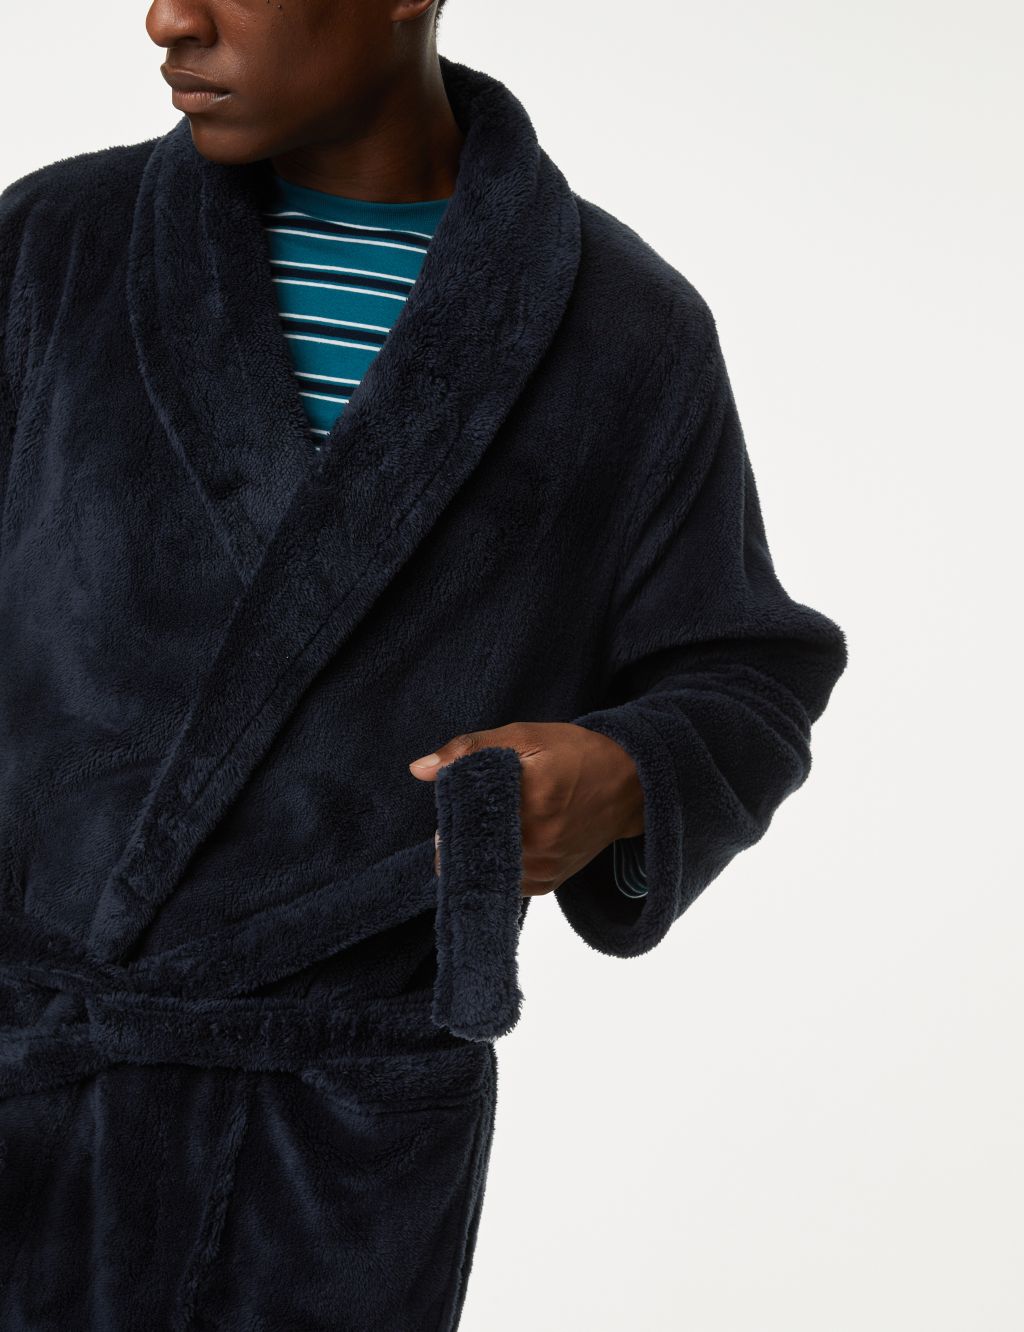 Fleece Supersoft Dressing Gown image 2